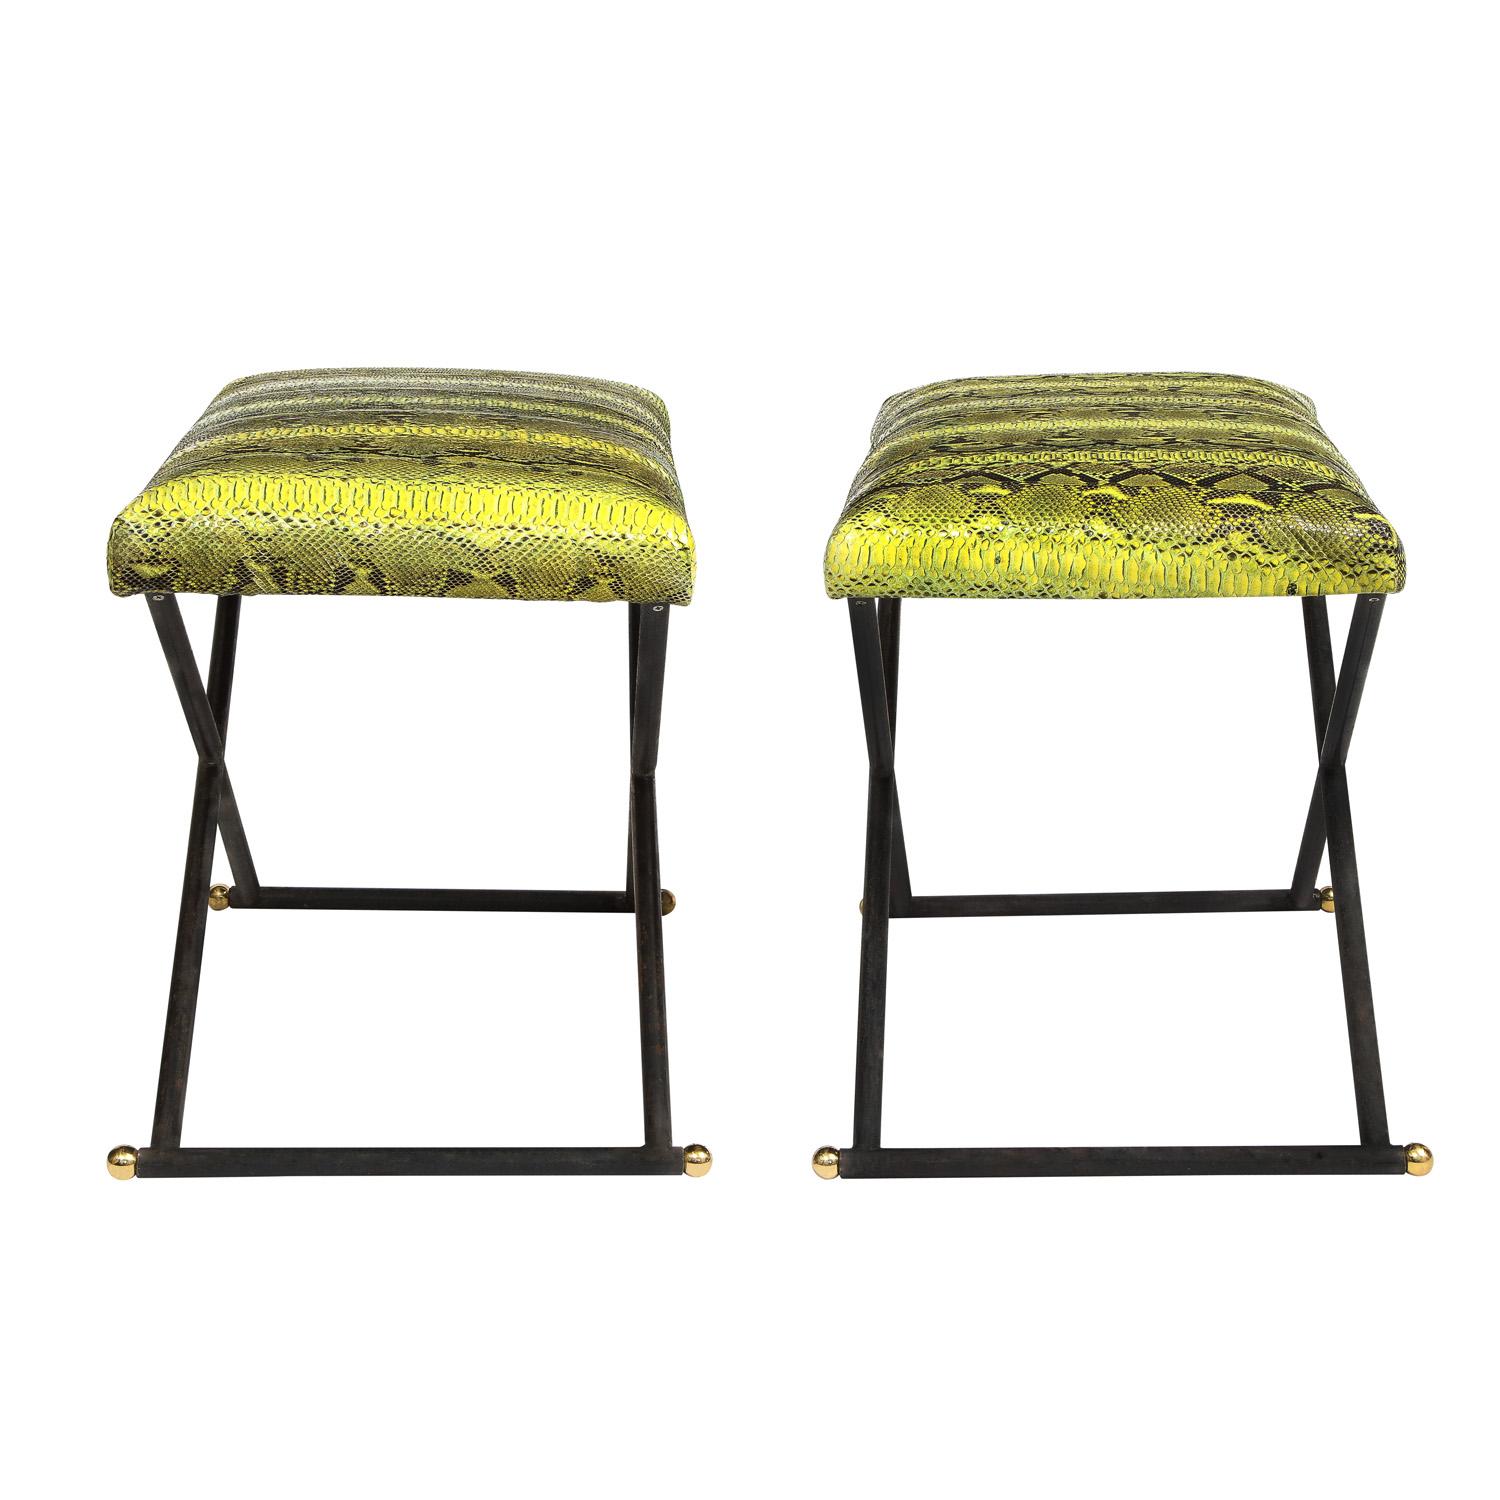 Modern Karl Springer Pair of Rare X Benches with Python Seats, 1980s